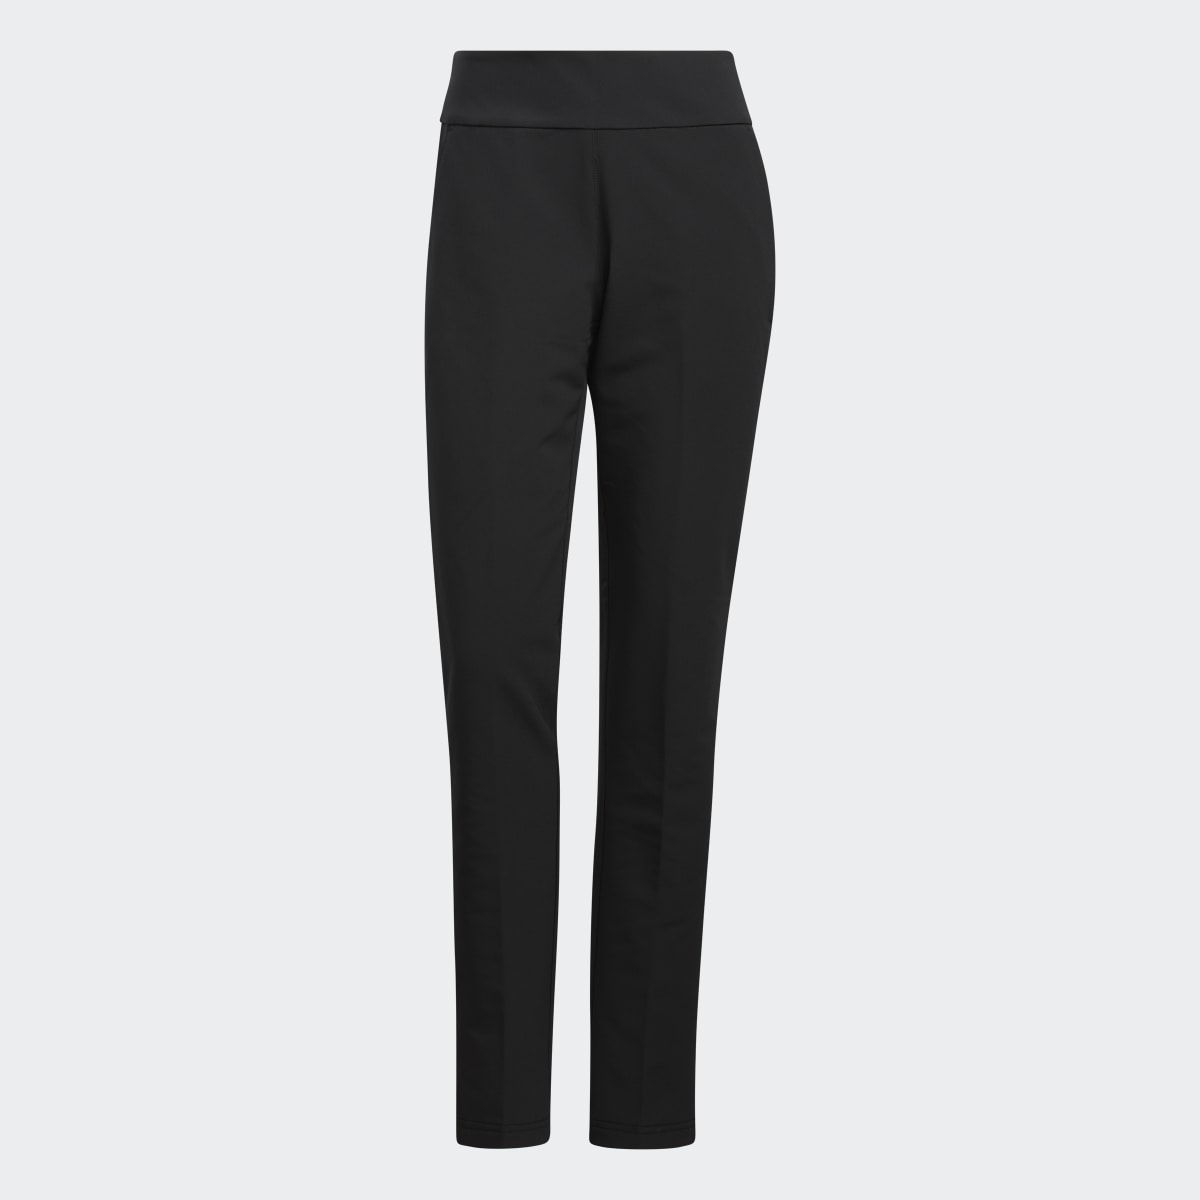 Adidas Winter Weight Pull-On Golf Pants. 4